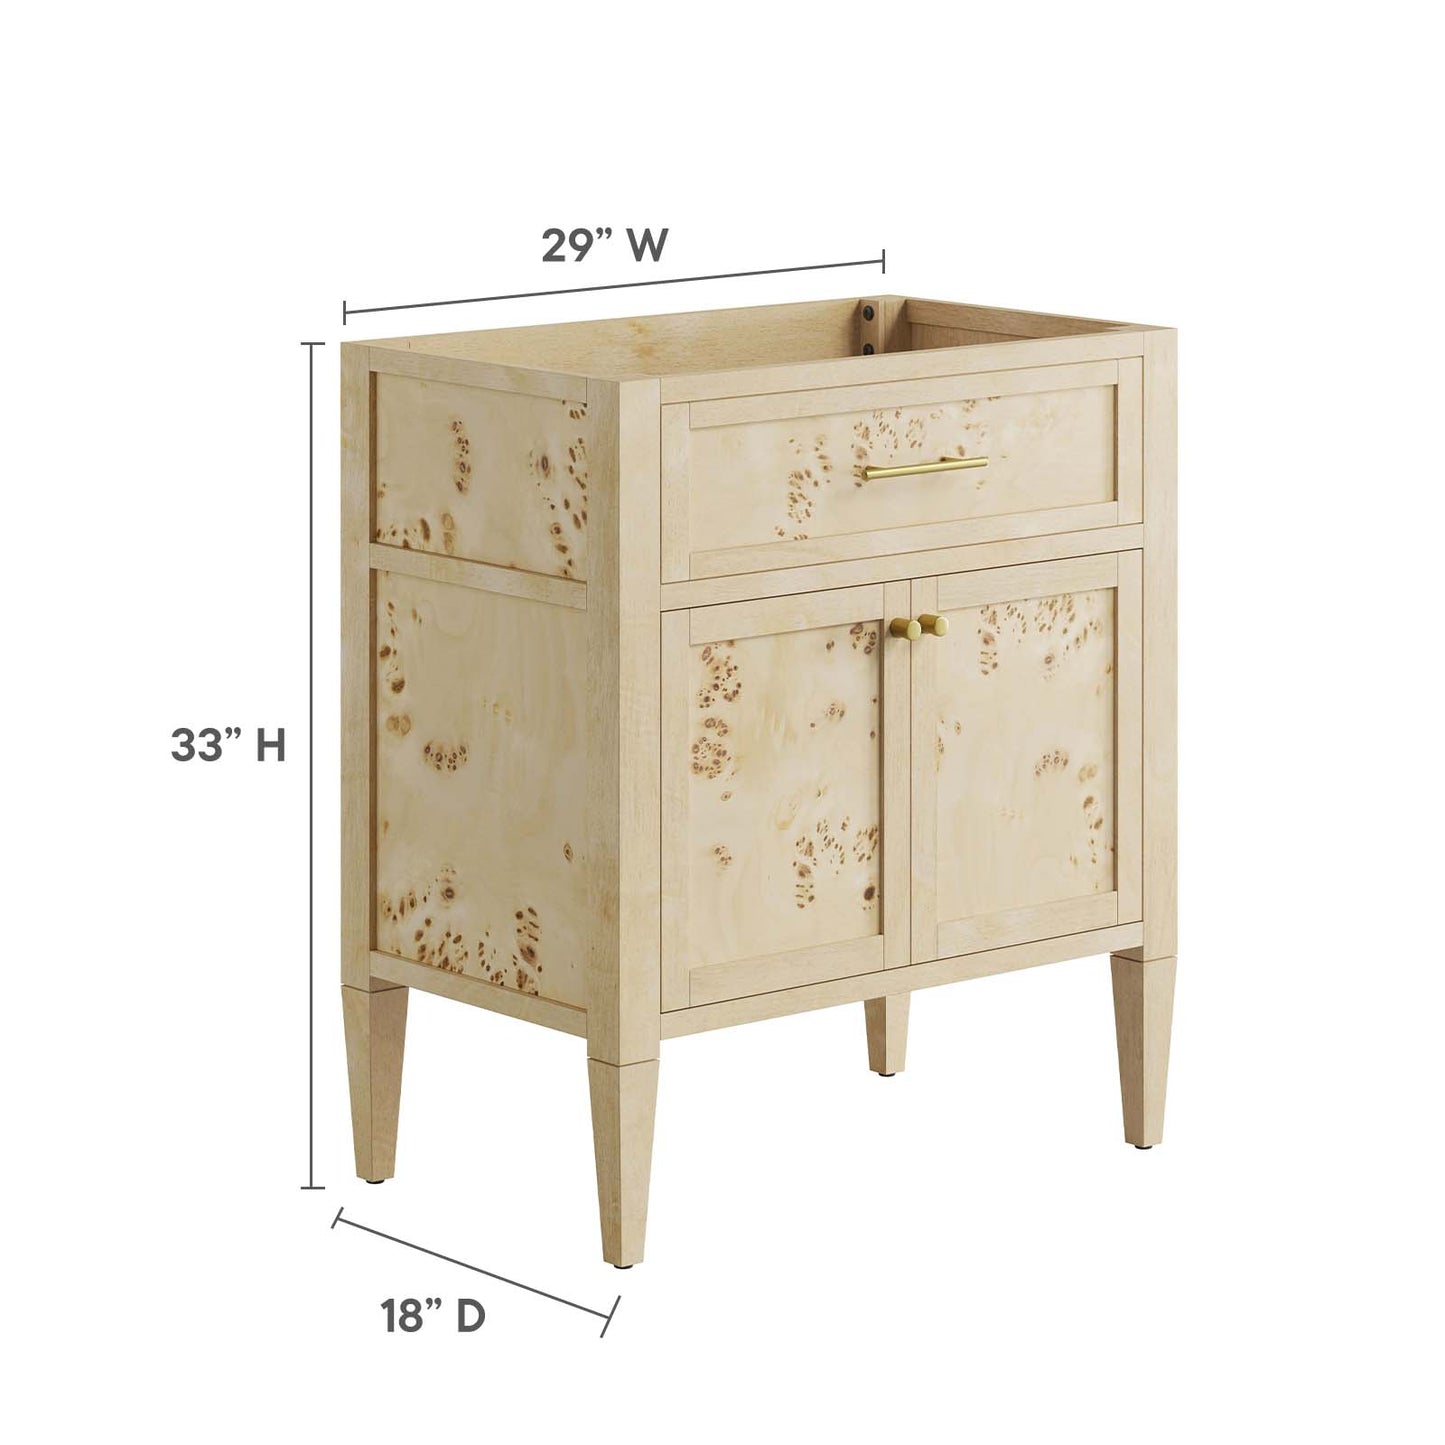 Elysian 30" Bathroom Vanity Cabinet (Sink Basin Not Included) By Modway - EEI-6138 | Bathroom Accessories | Modway - 17